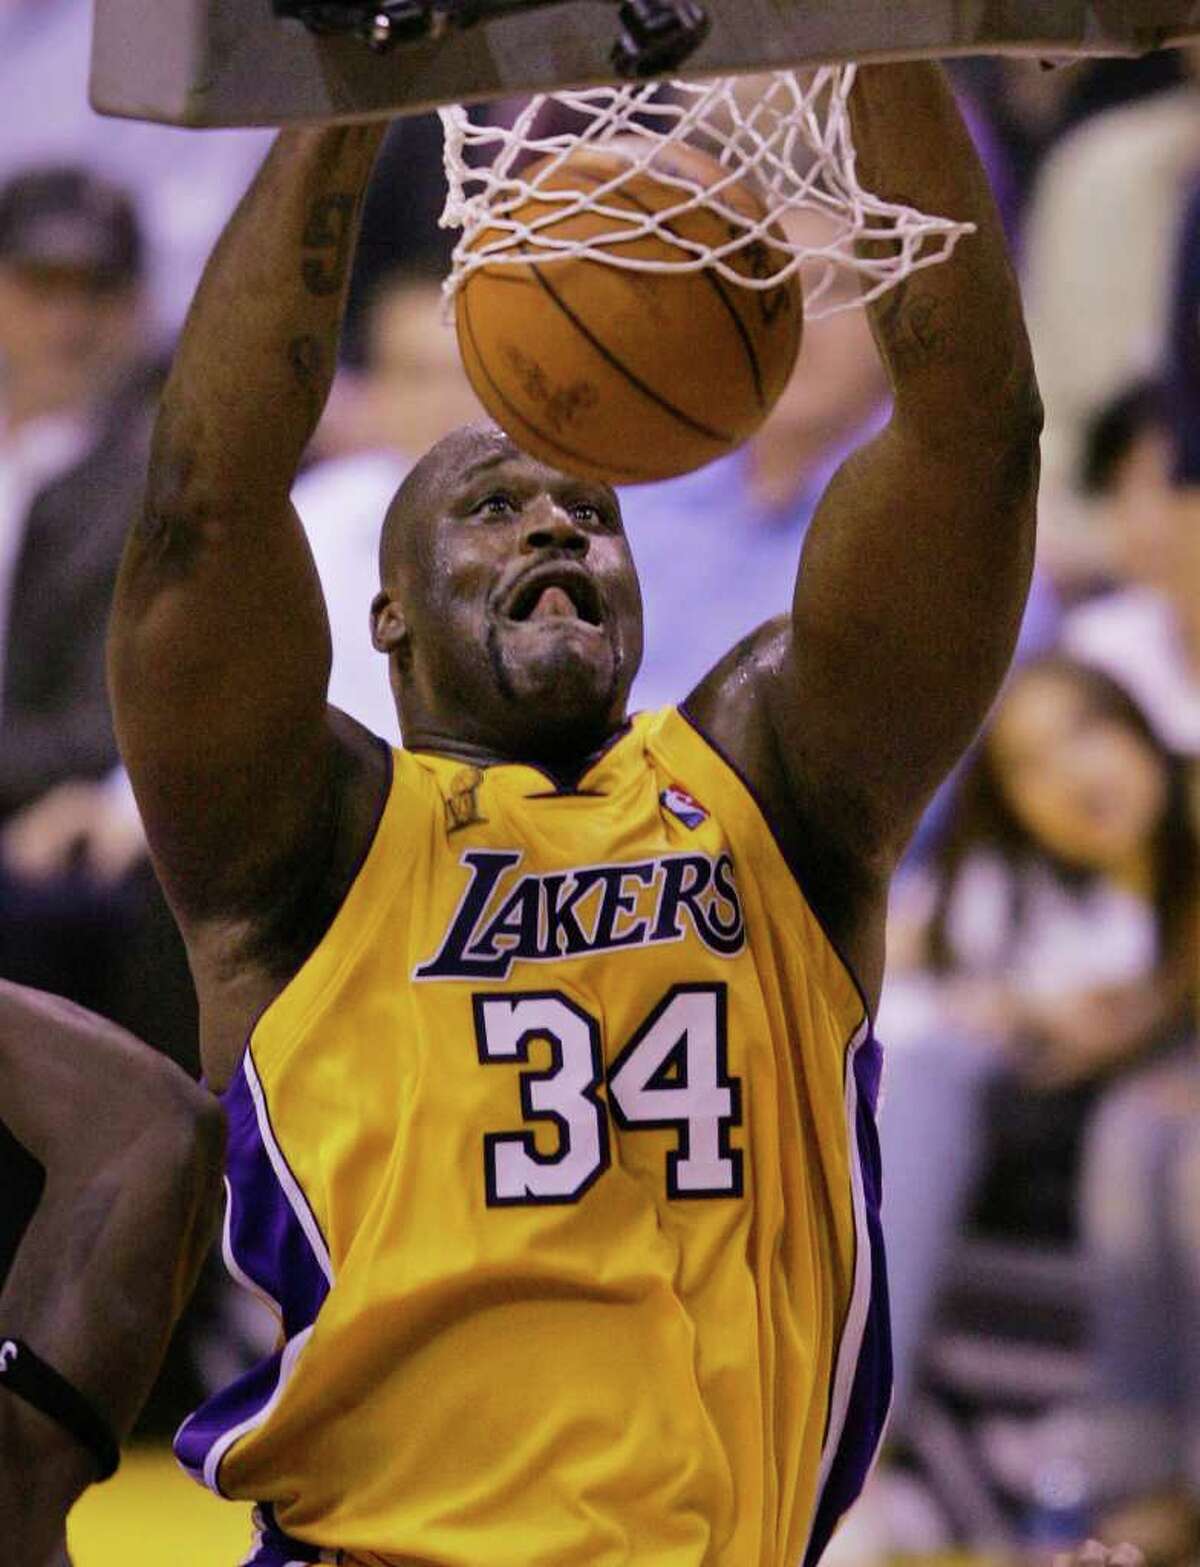 The Los Angeles Lakers' Shaquille O'Neal slam dunks against the Detroit Pistons in the third quarter of Game 2 of the NBA Finals in Los Angeles, Tuesday, June 8, 2004. (AP Photo/Chris Carlson)